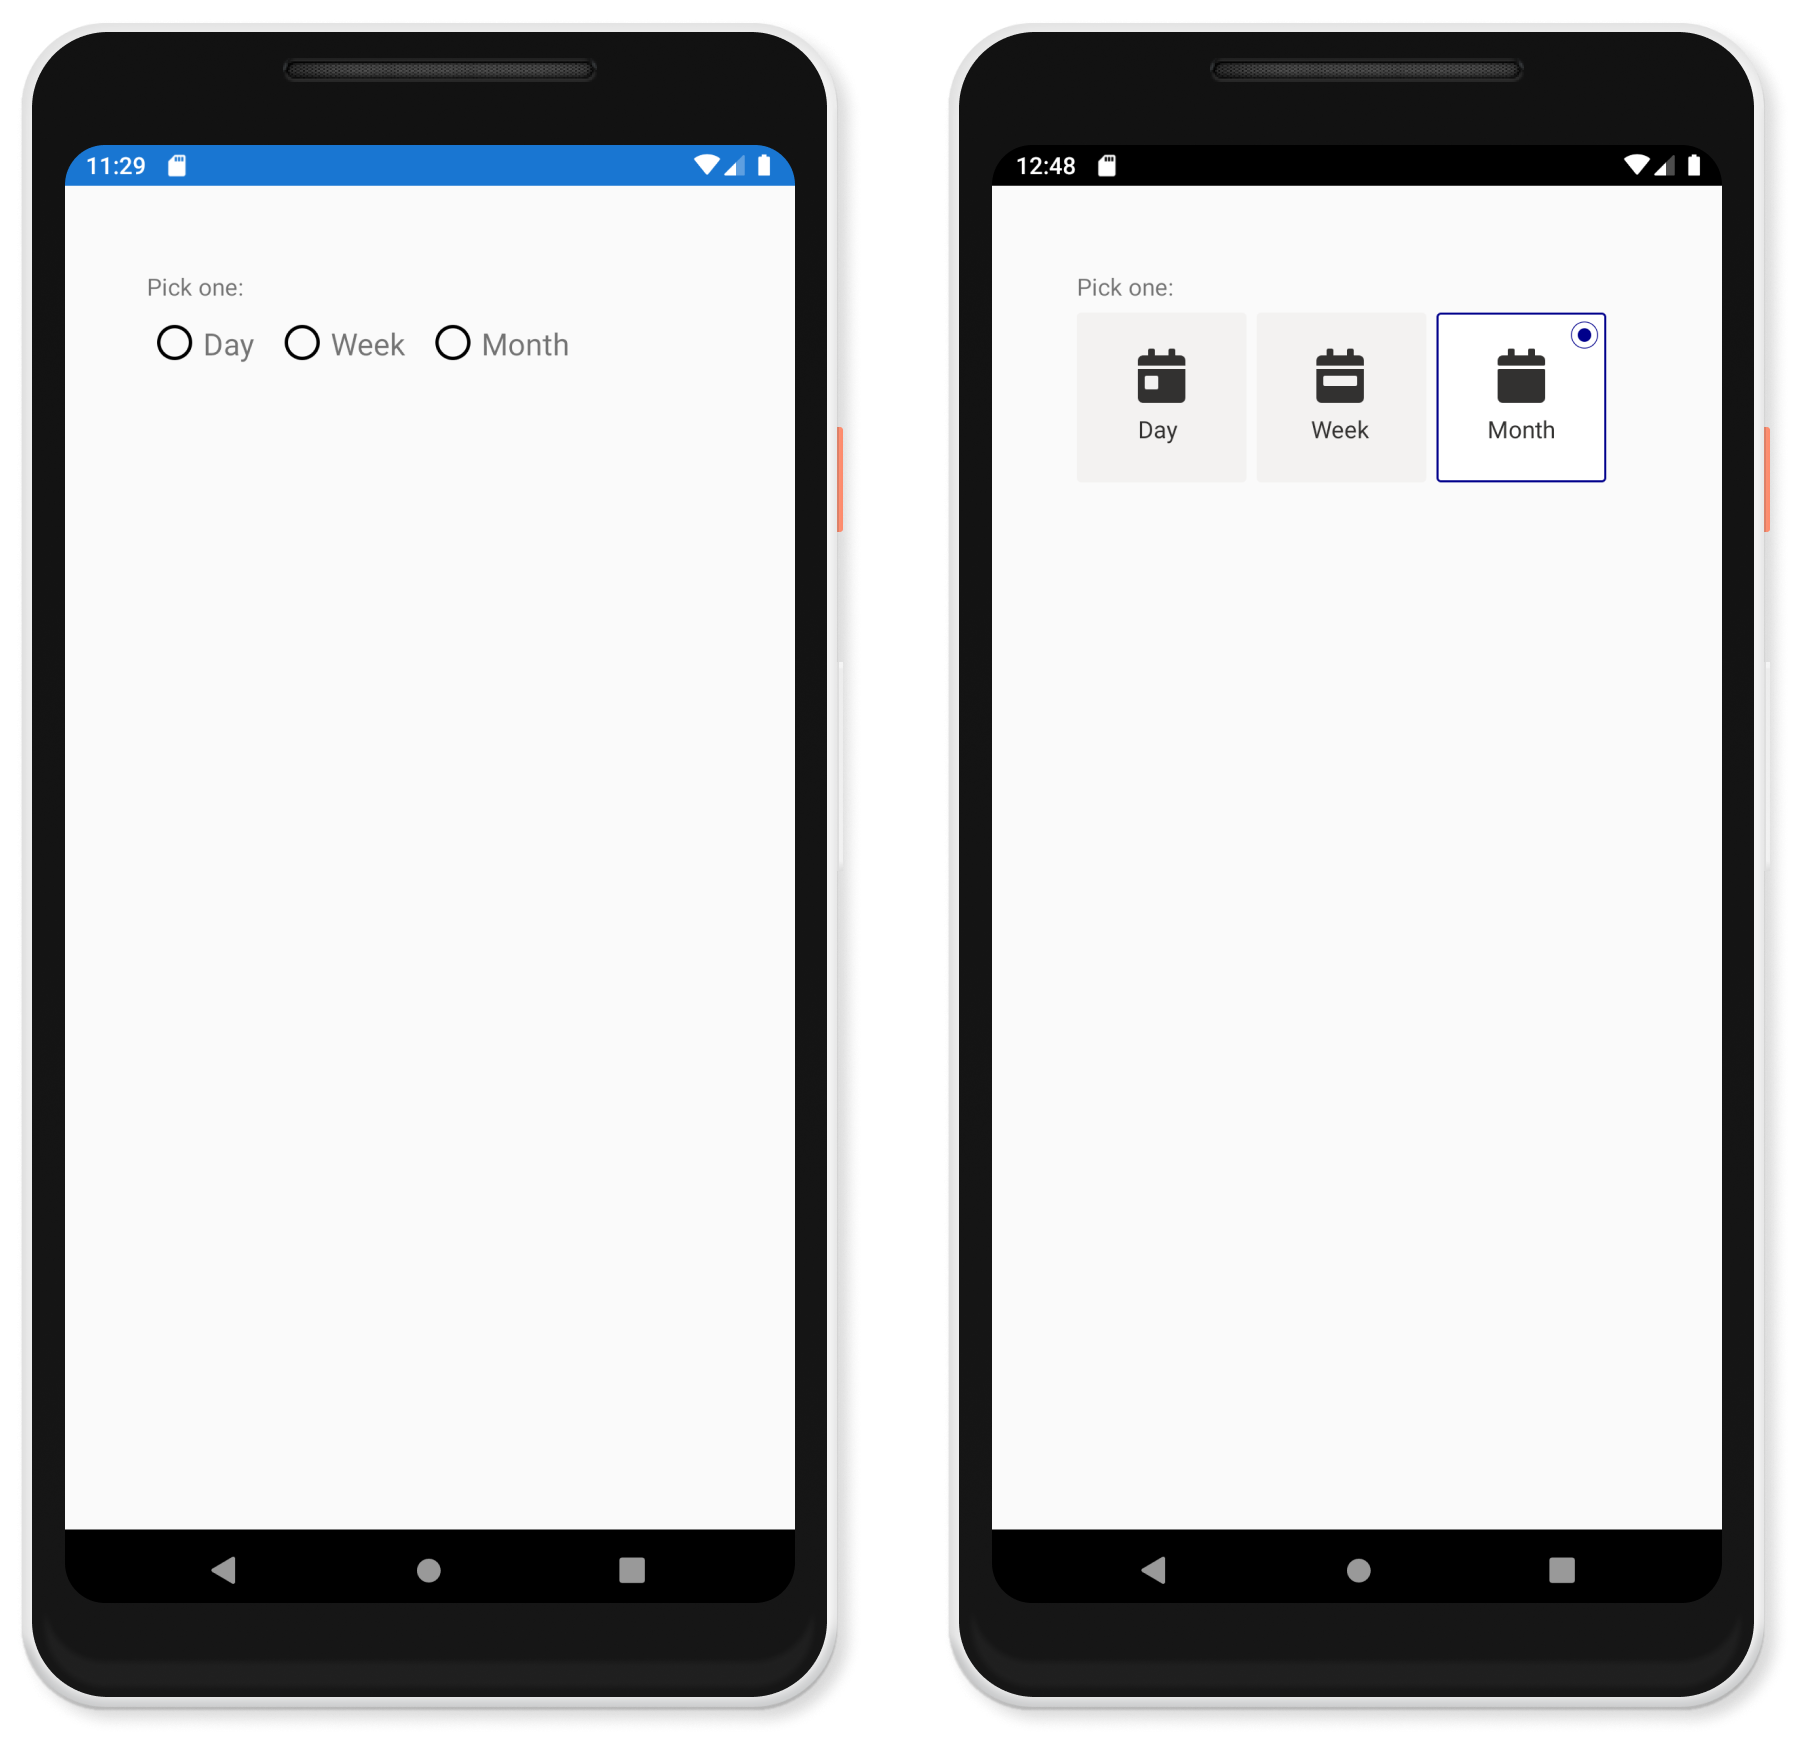 Xamarin Webview link is opening twice in Android - Microsoft Q&A